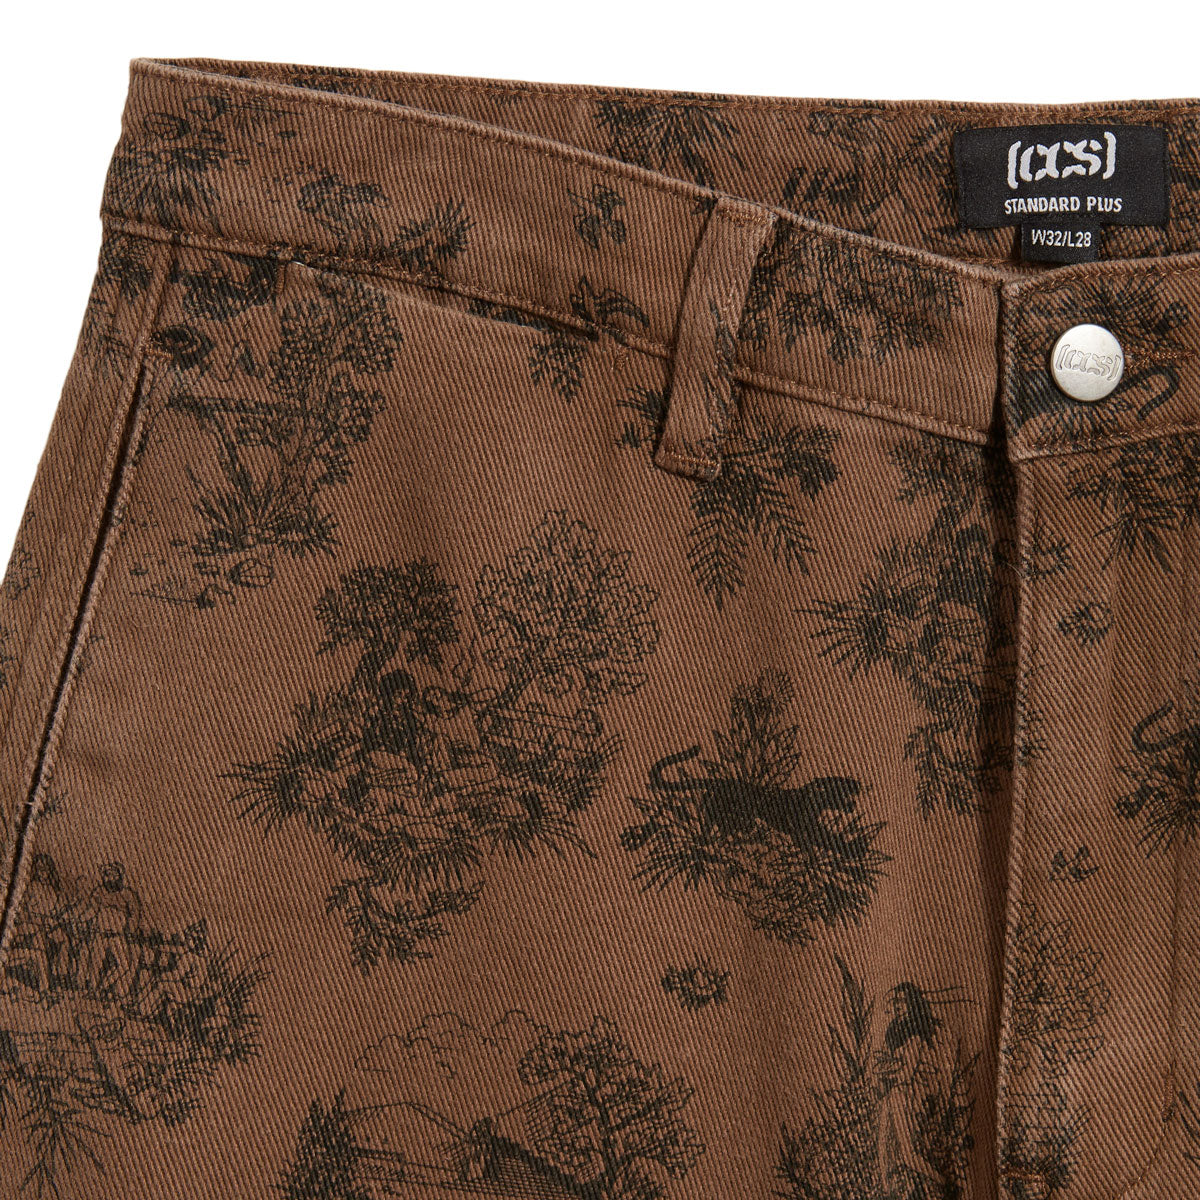 CCS Original Relaxed Toile Chino Pants - Brown Root image 5